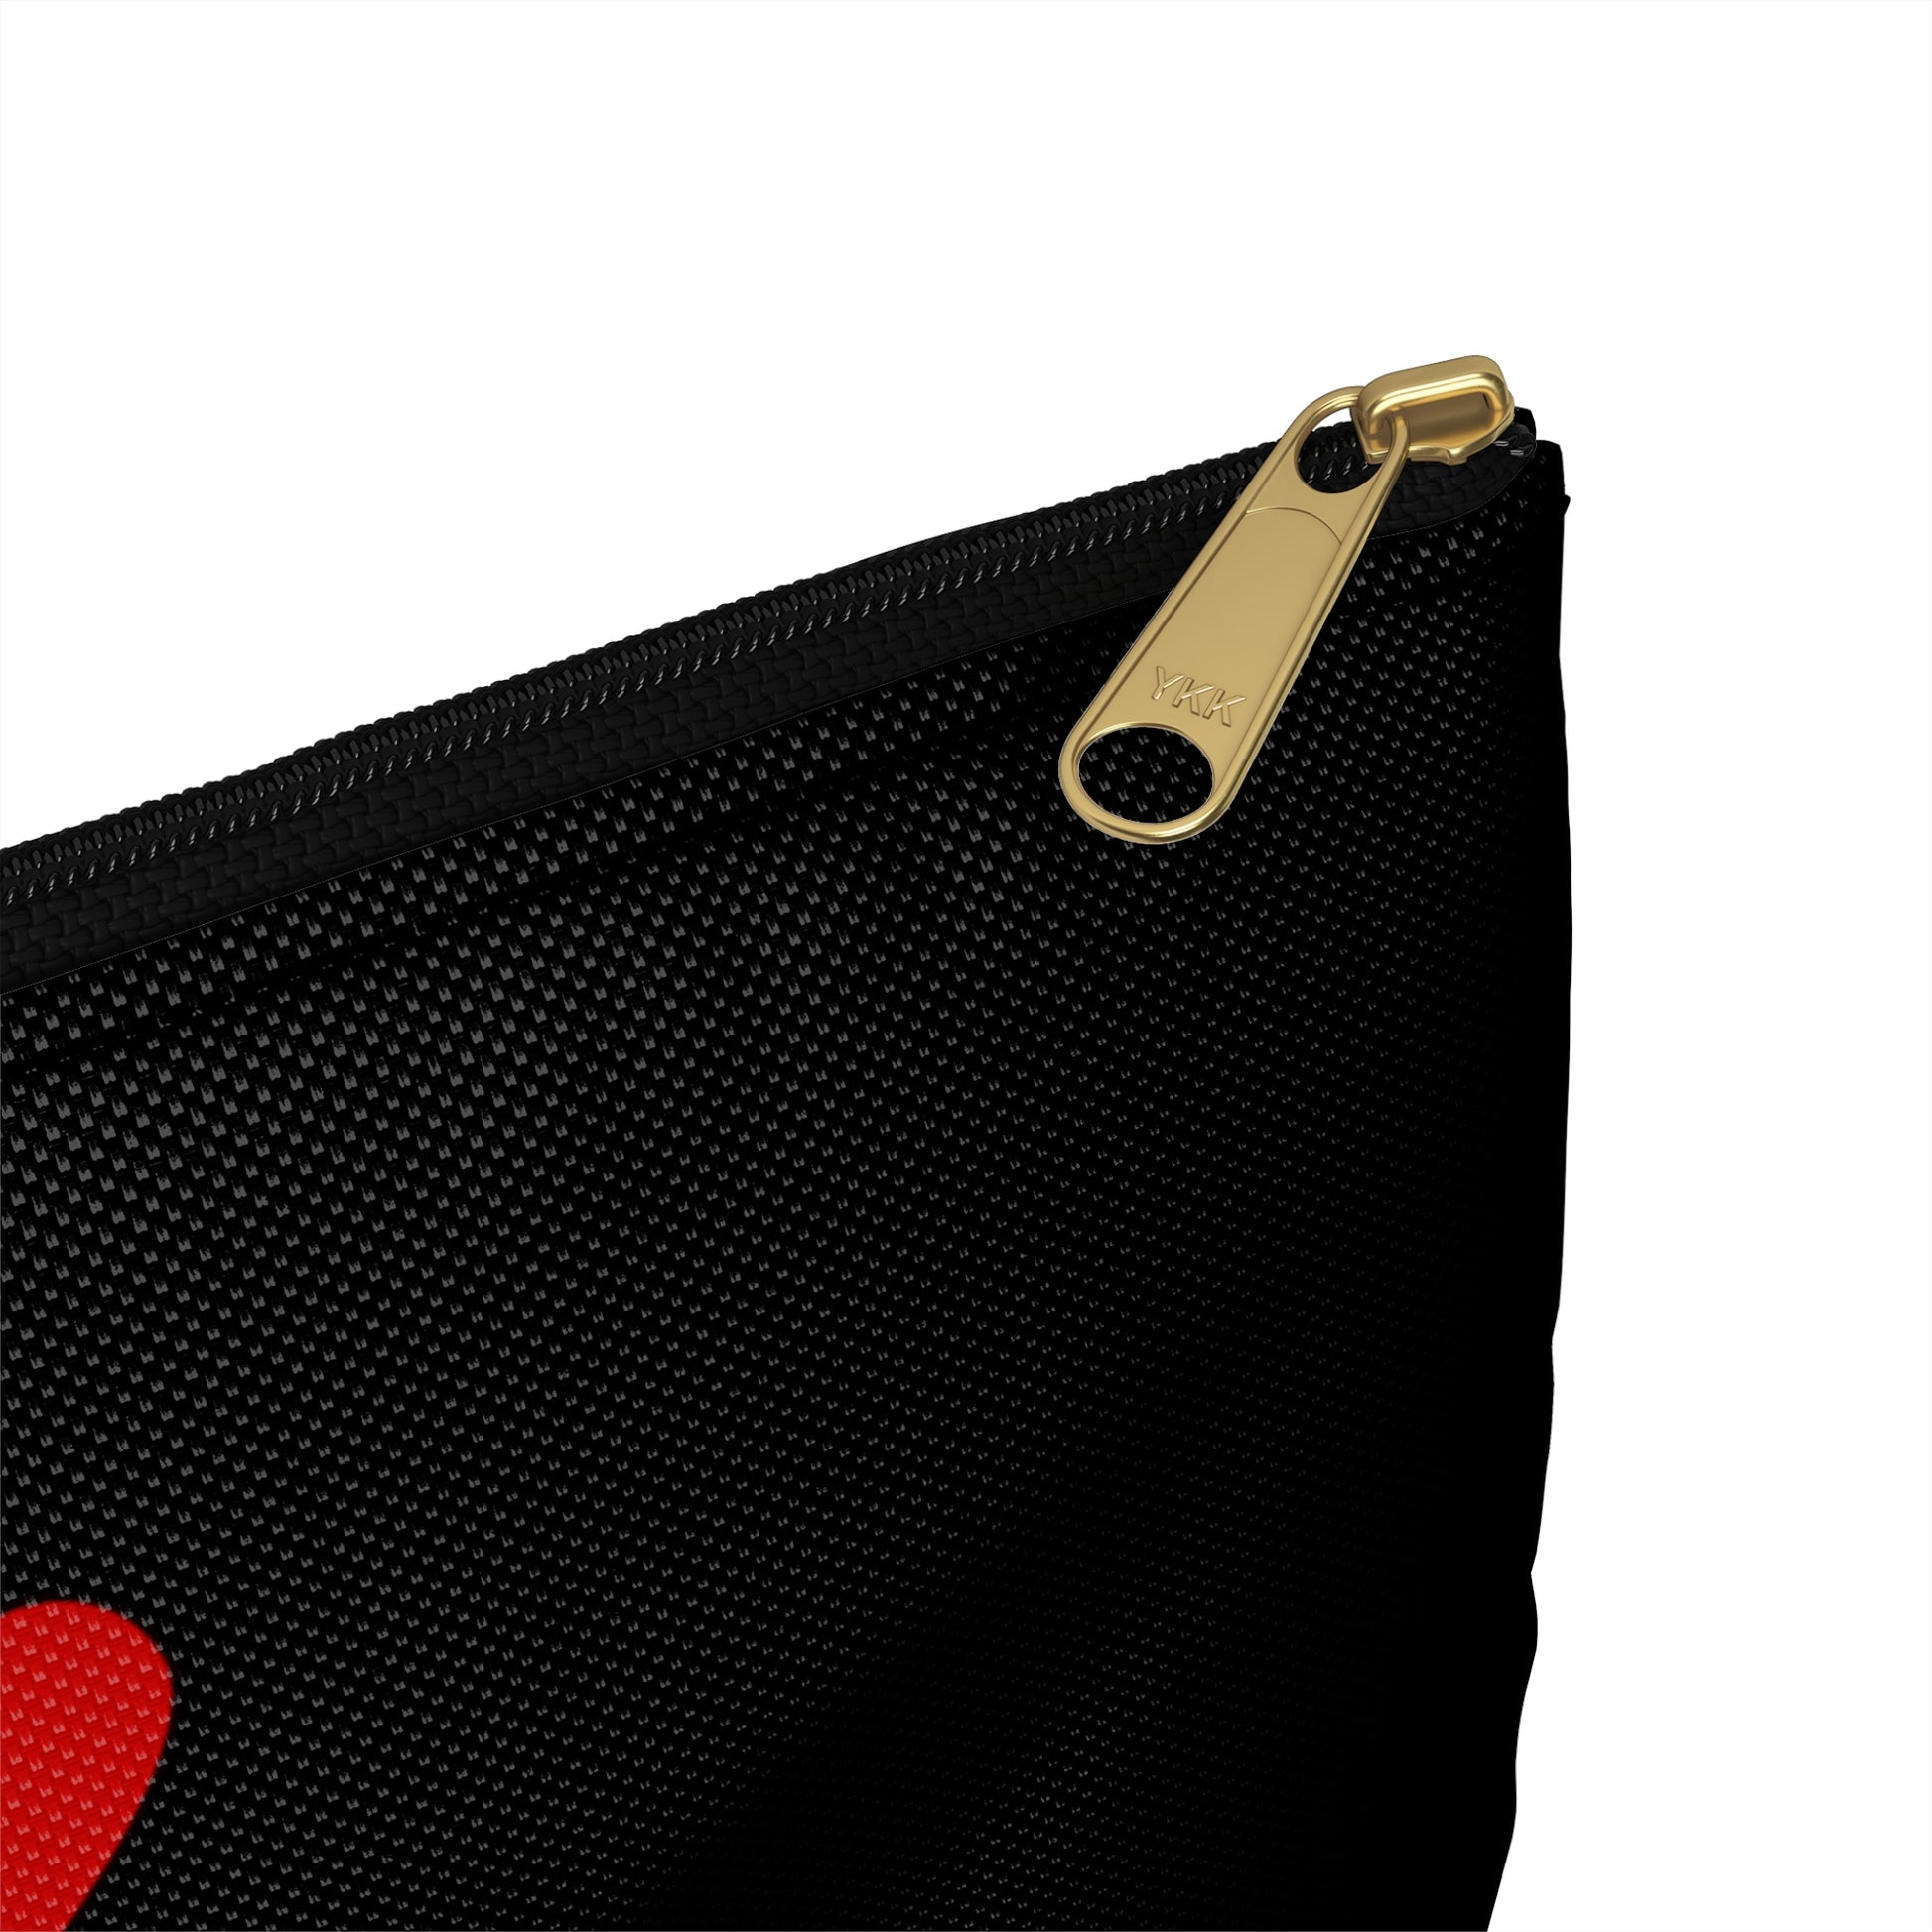 a black bag with a red heart on it